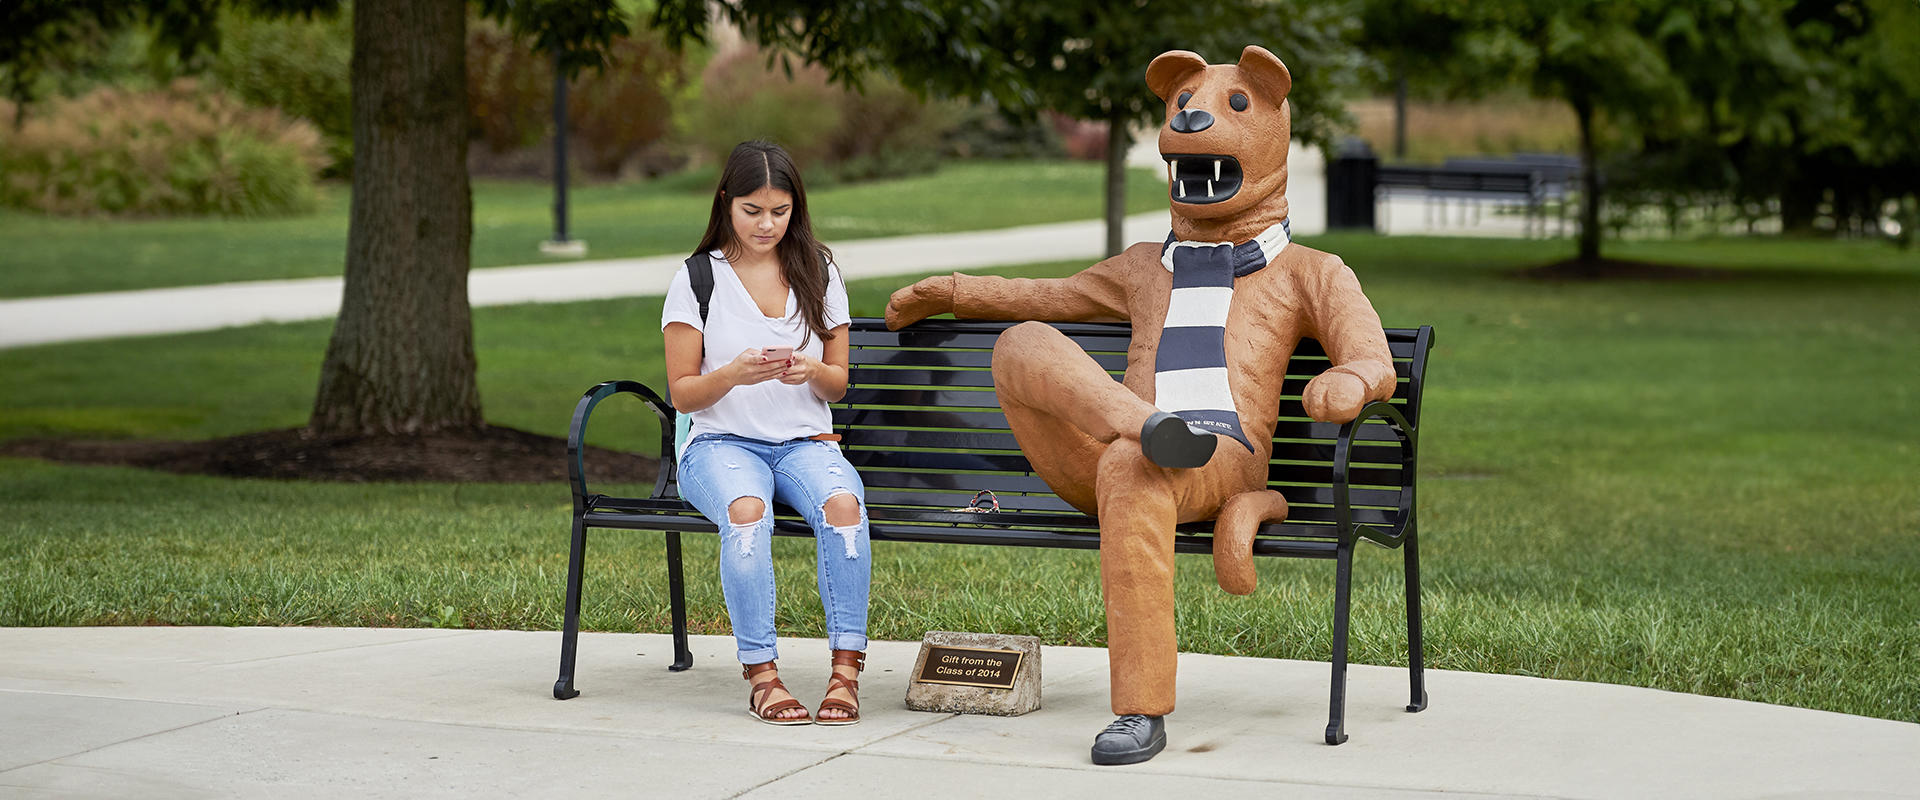 Student sits on bench next to Nittany Lion mascot